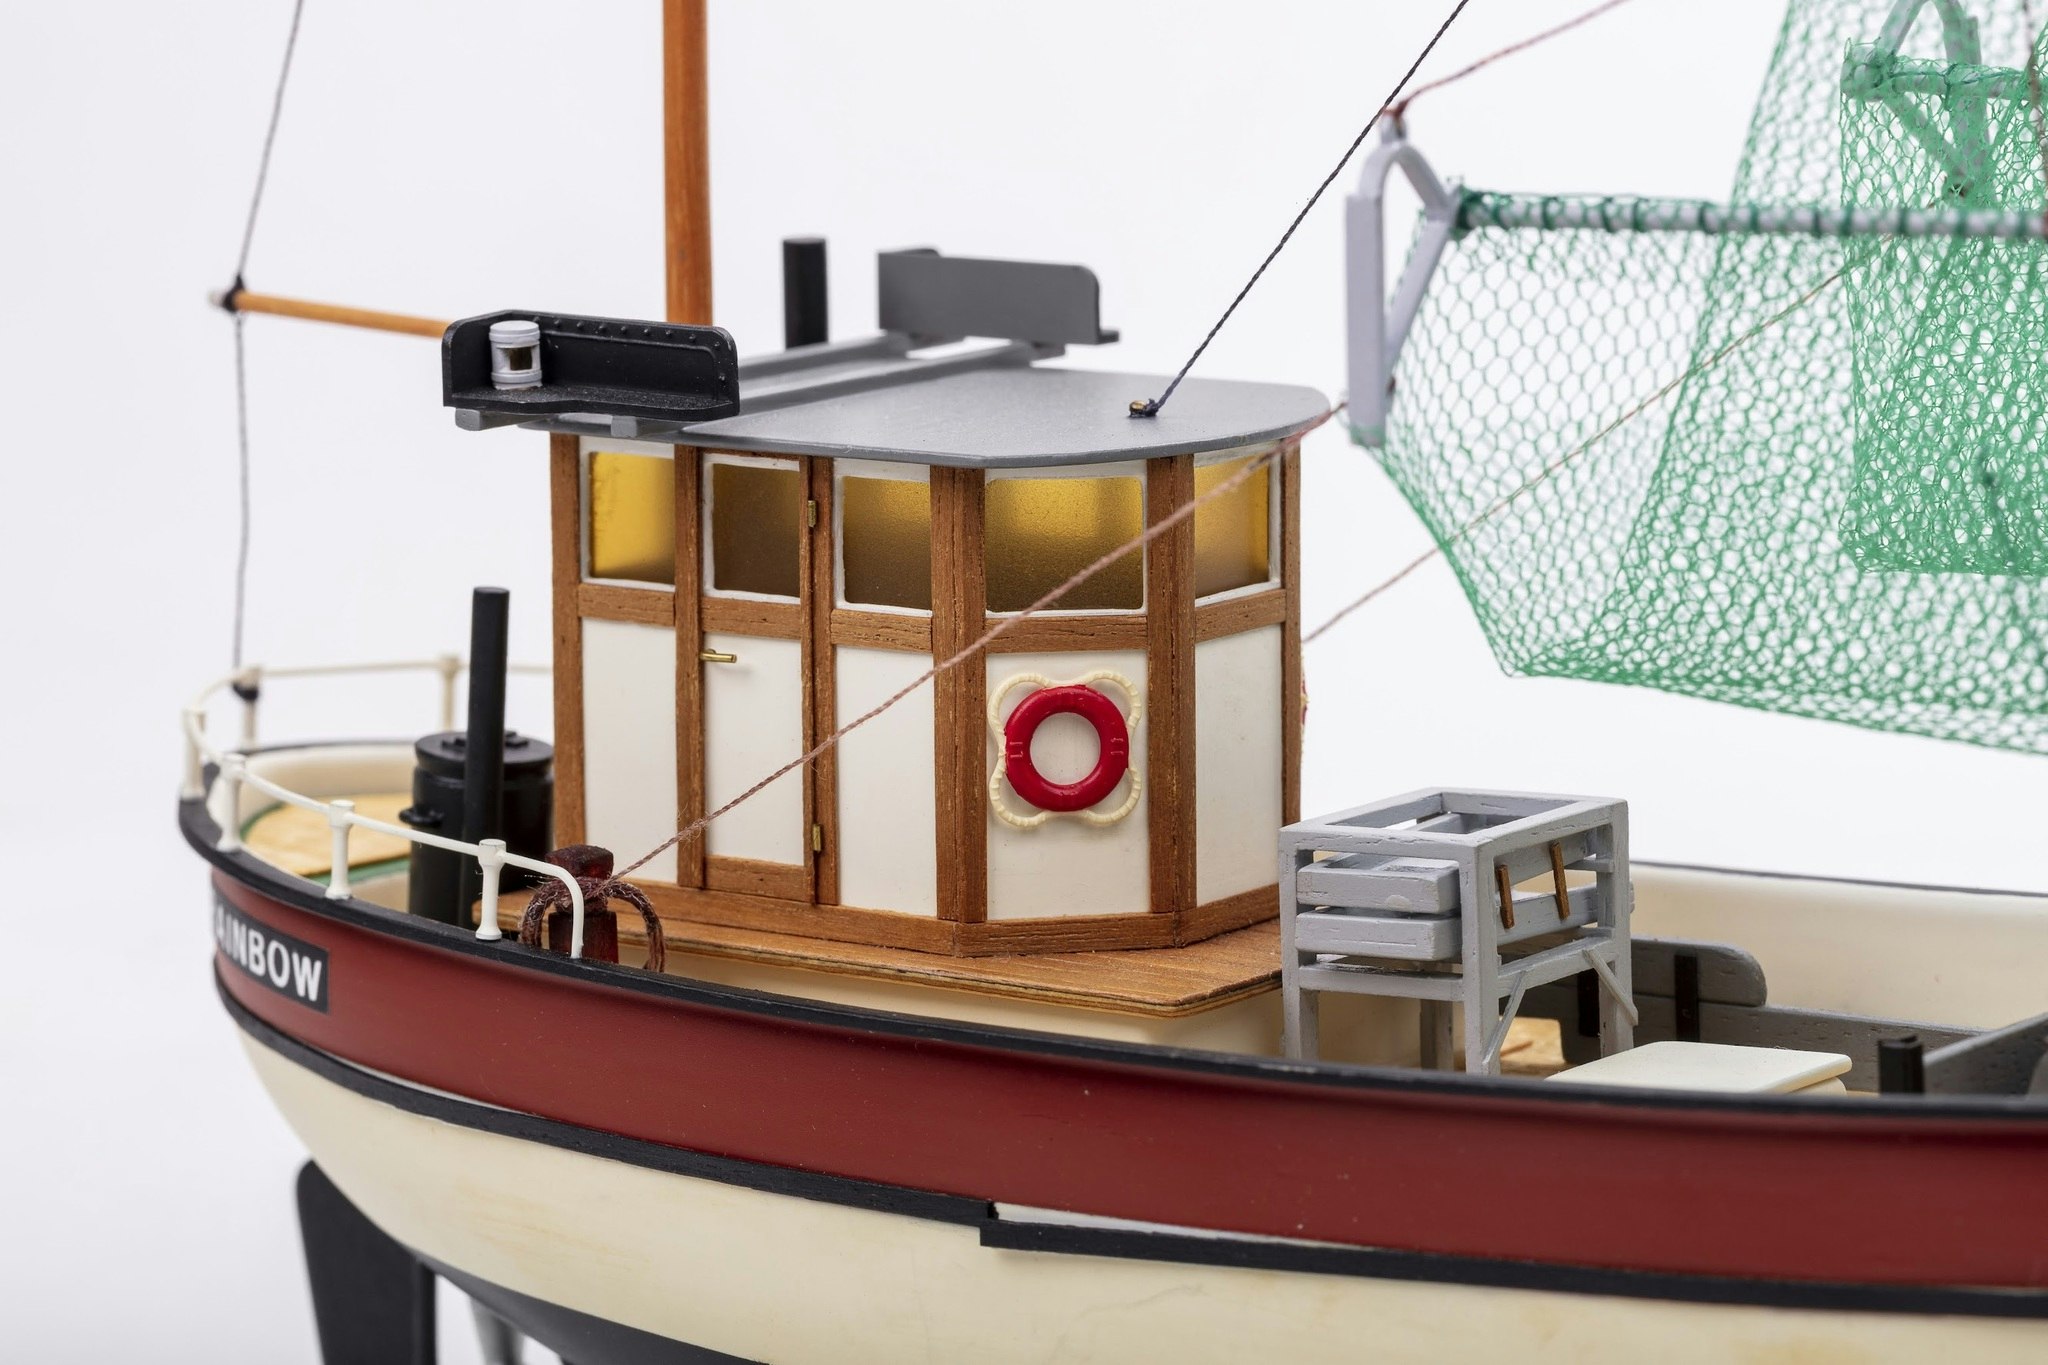 Scale 1/30 Constructionmodel of Rainbow 201, Fishing Boat - from Billing Boats